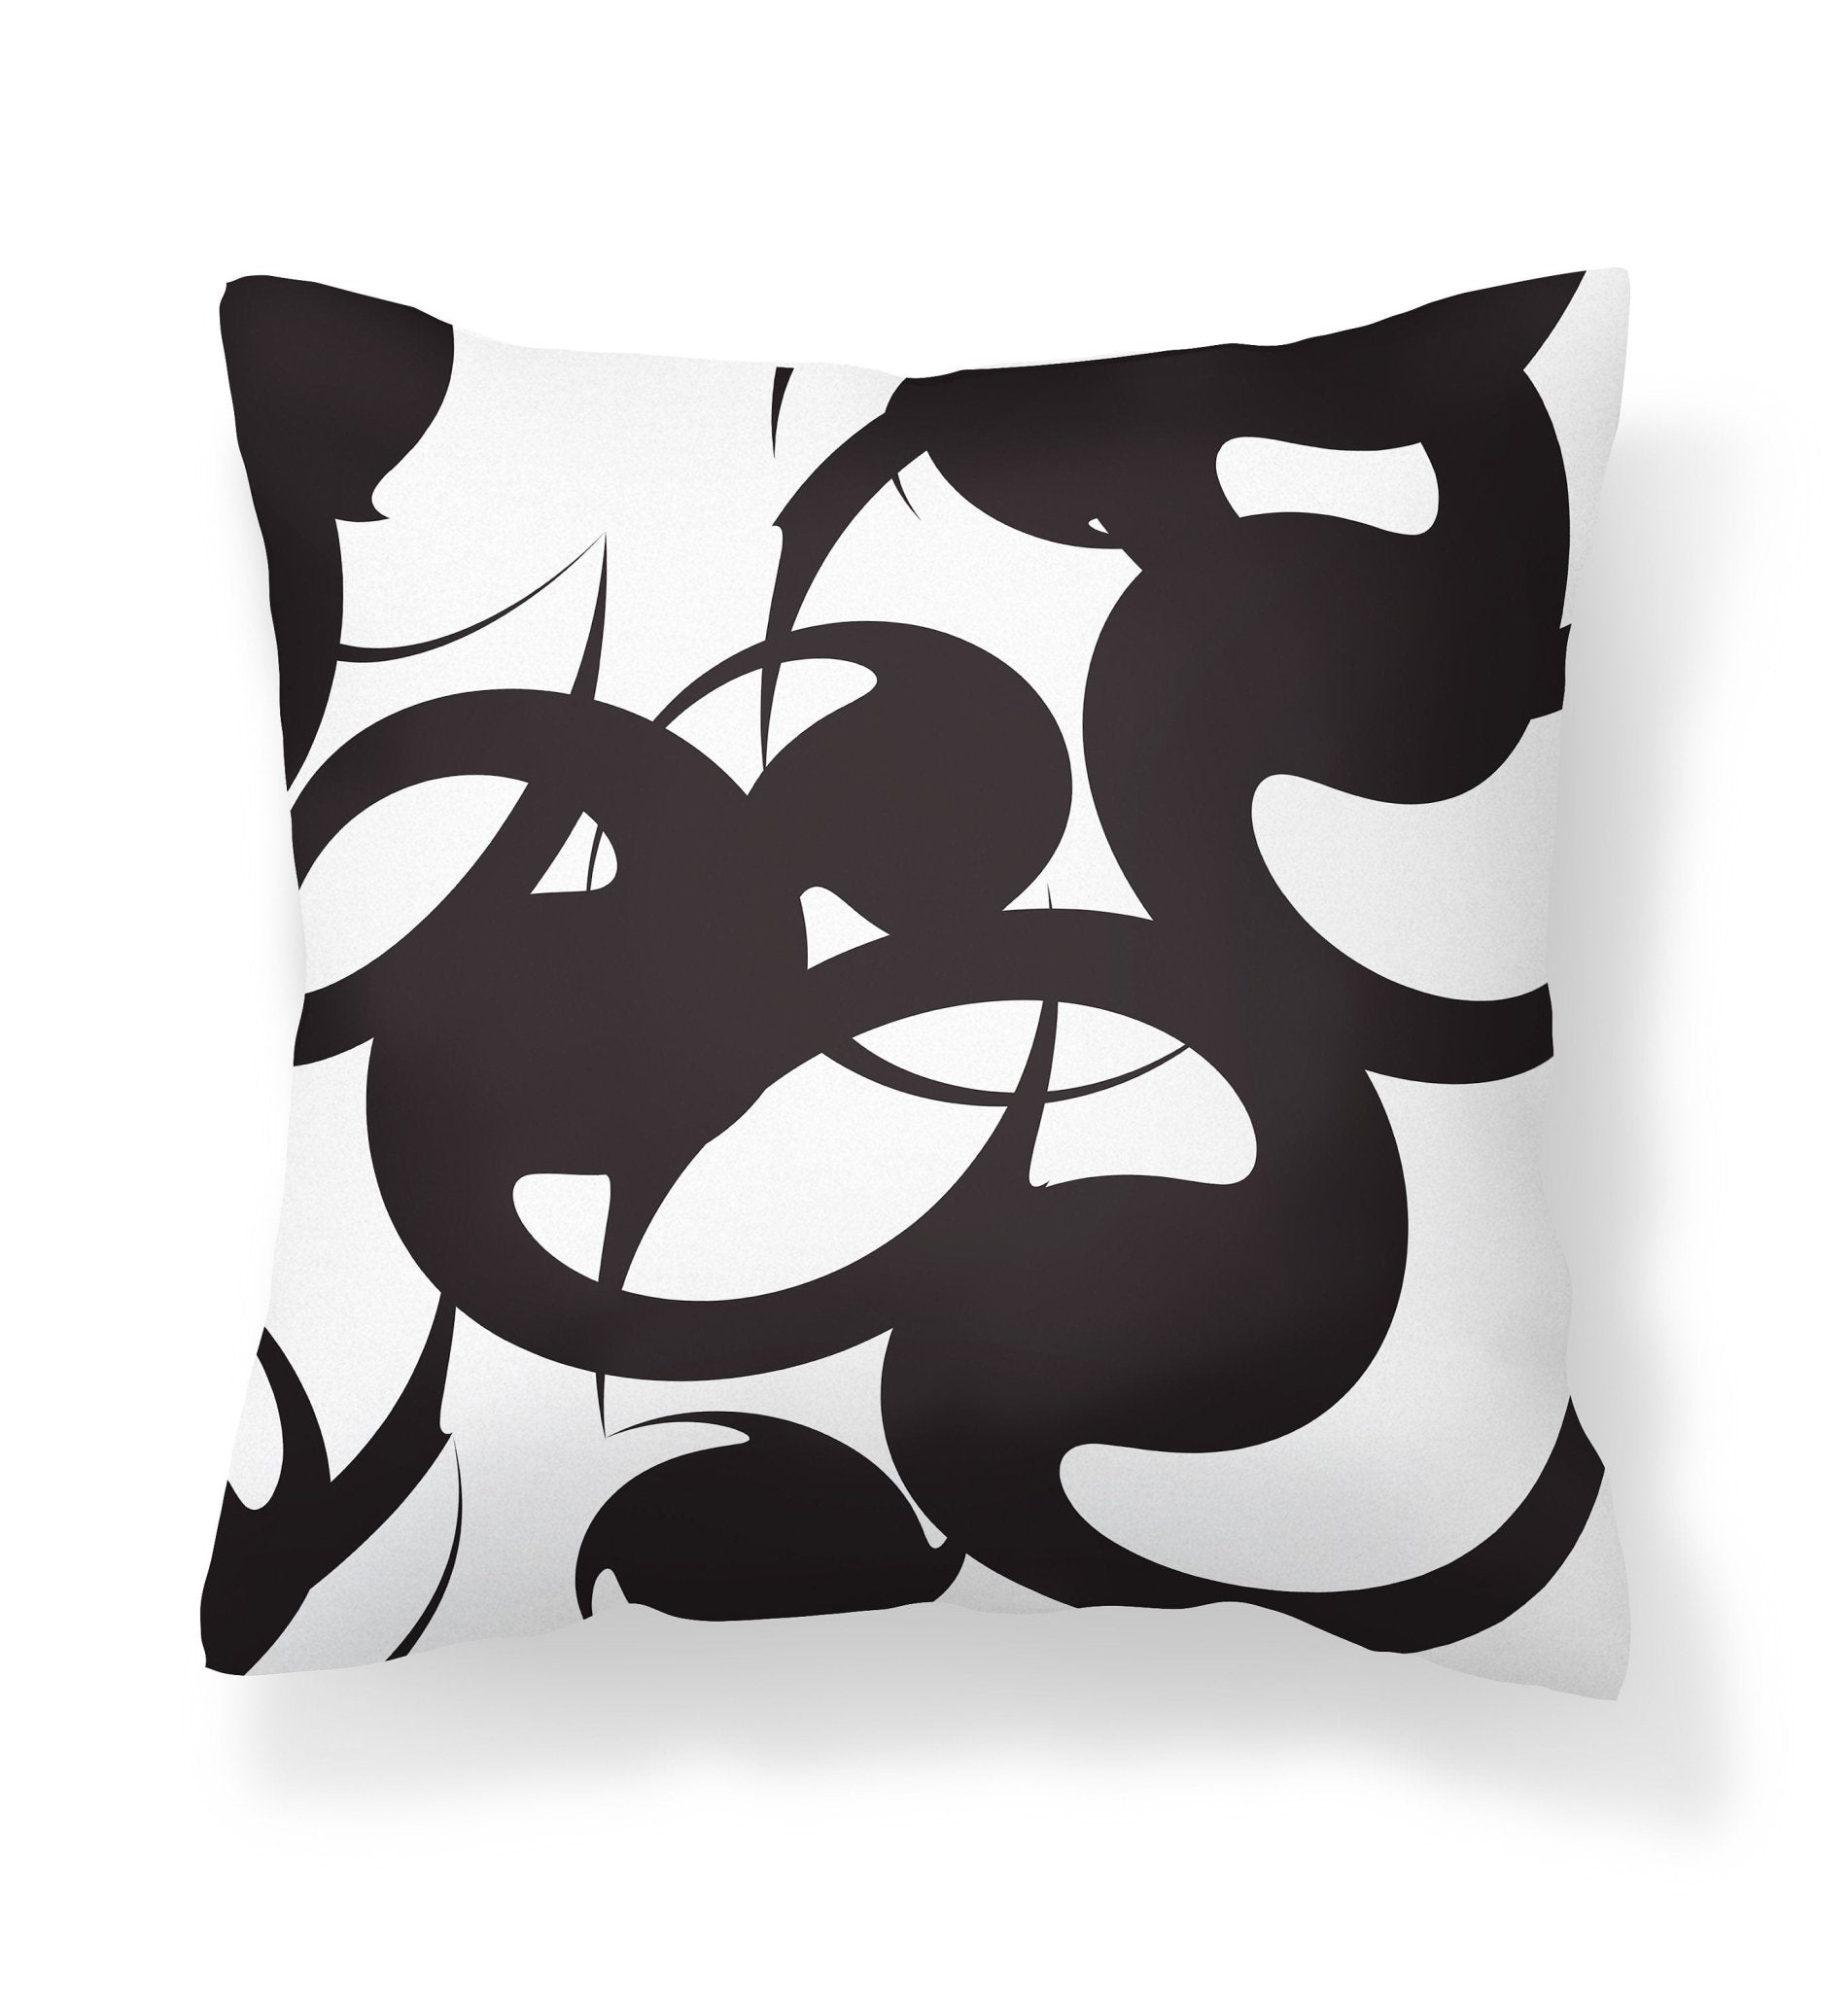 Abstract Pillow Cover - Black and White - Throw Pillows